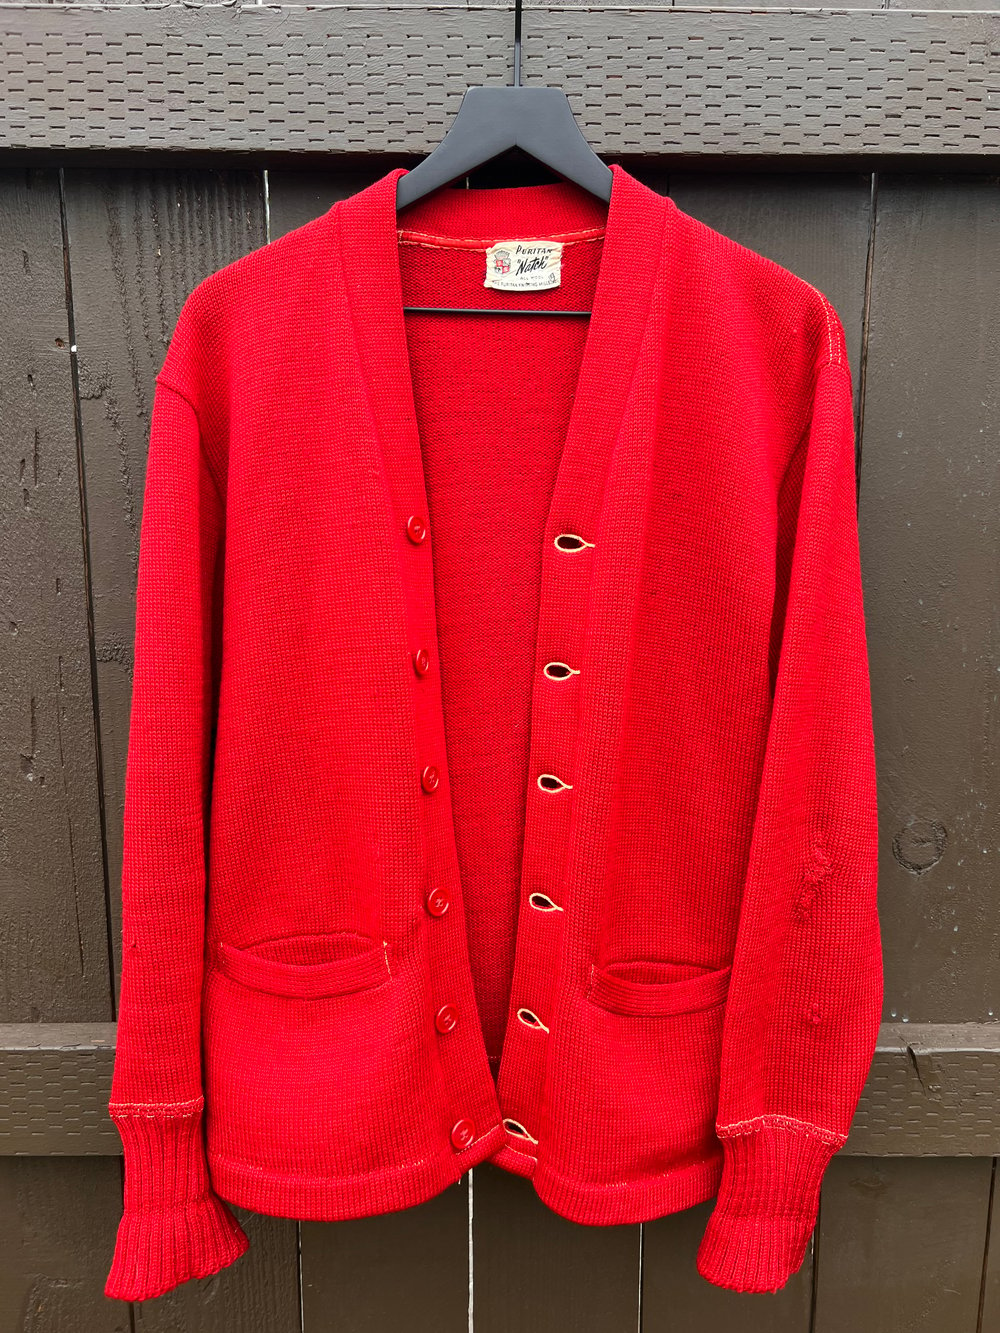 Vintage Puritan “Natch” Red Wool Sweater (S)